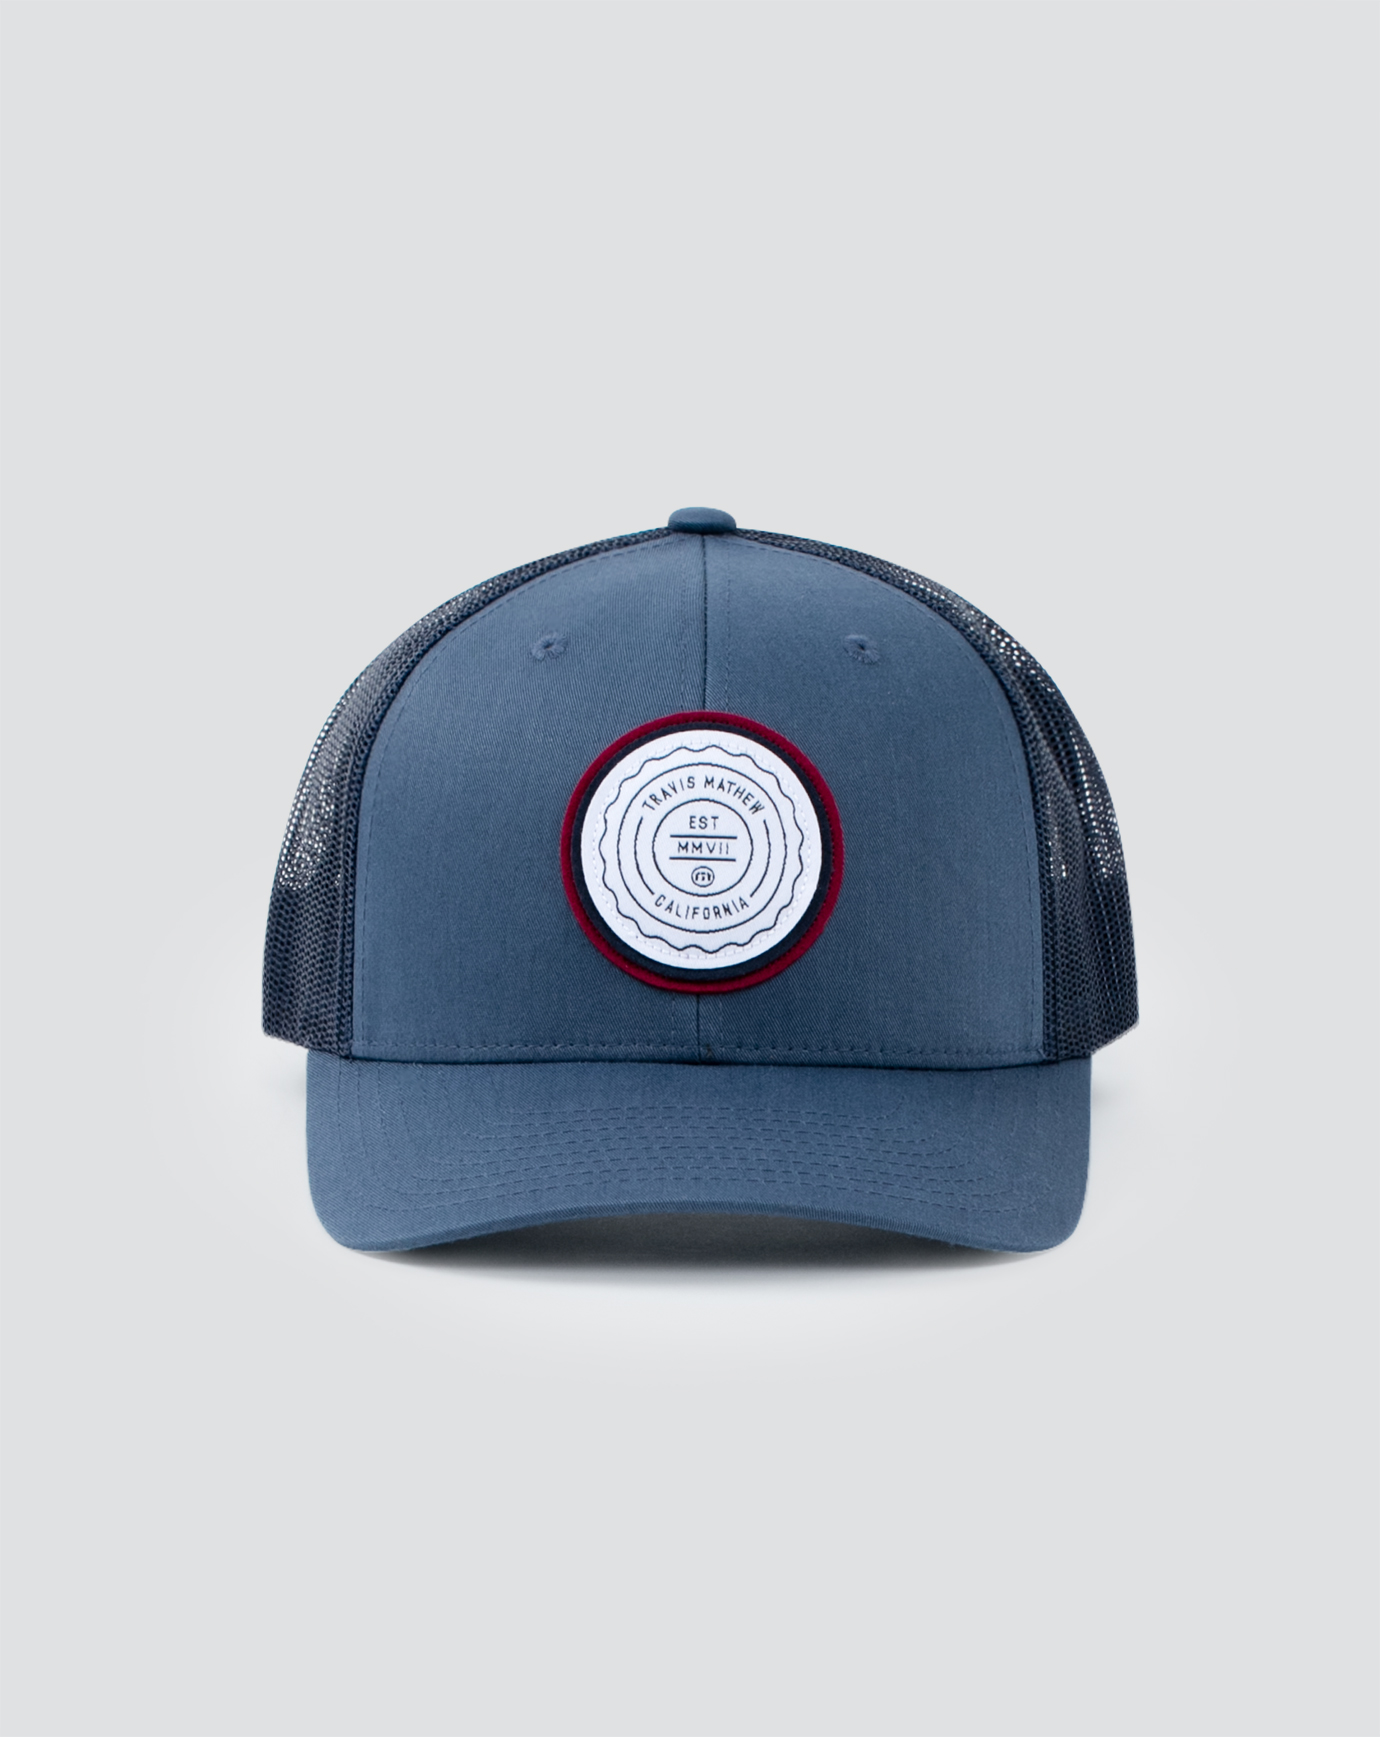 THE PATCH YOUTH HAT 1